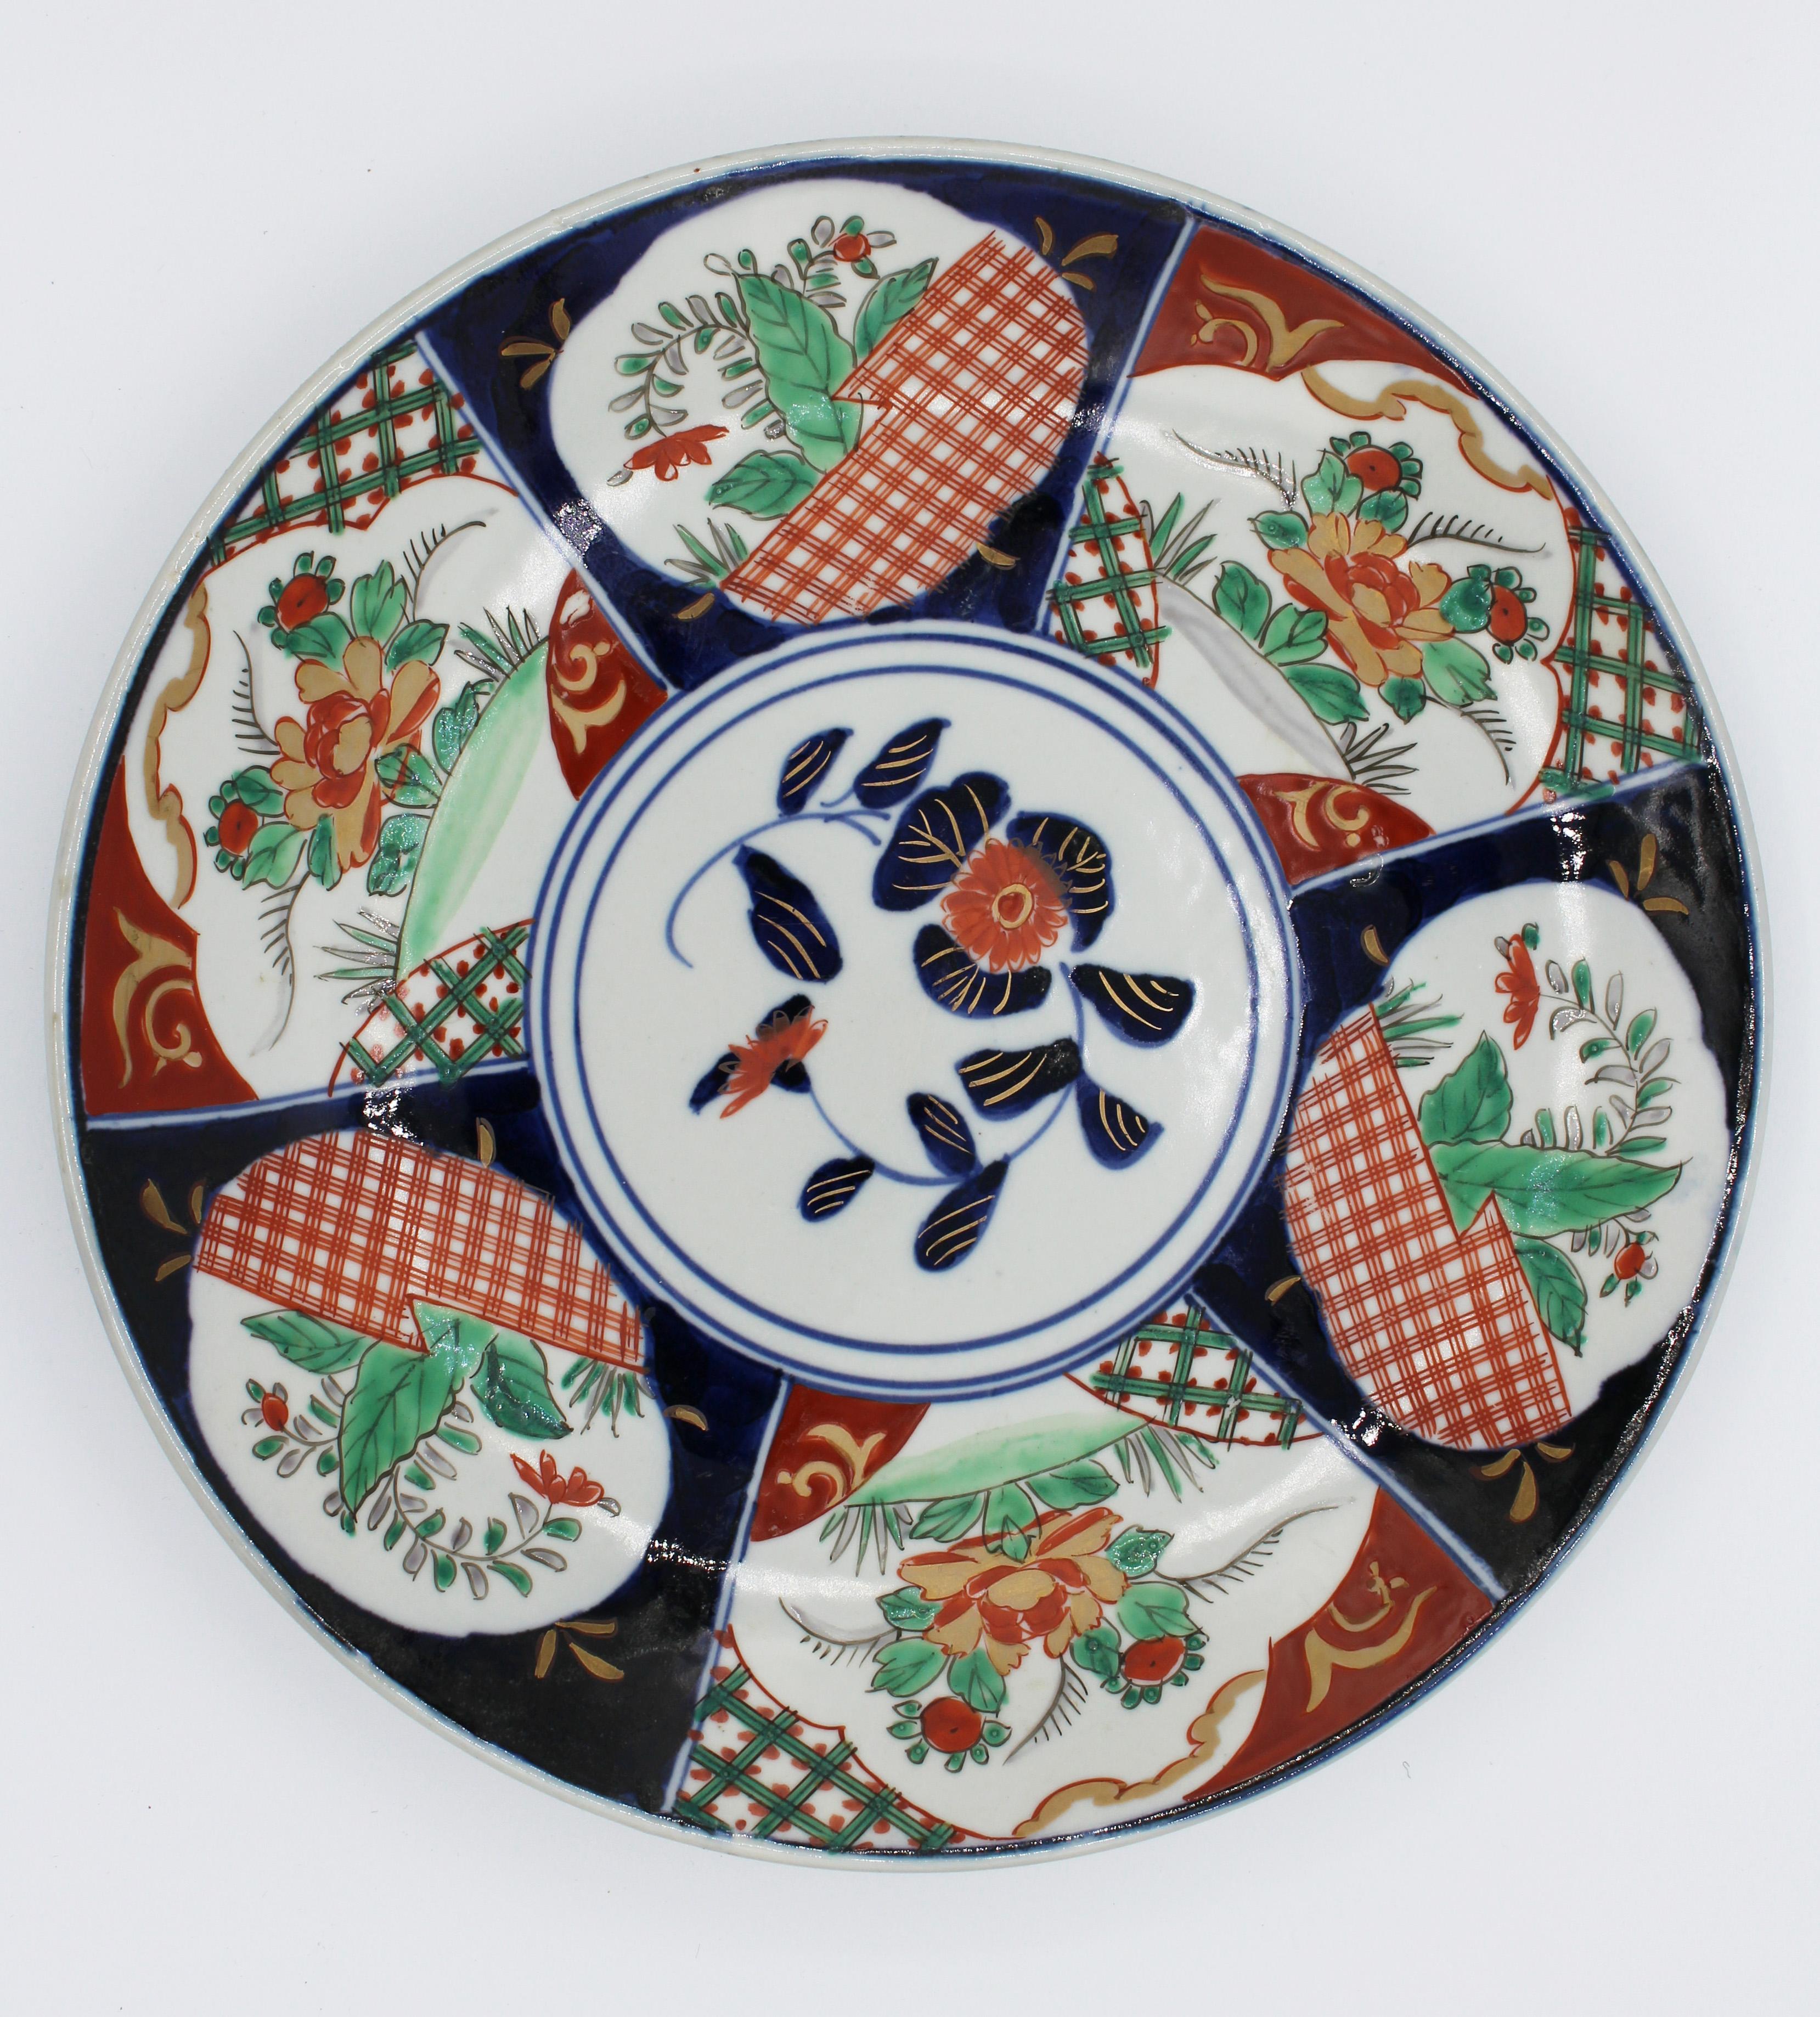 Circa 1870 Imari chop plate. Decorated with harmonious alternating garden motif reserves centered by a floral medallion. Japan.

We have been a major source for the selective buyer for over 90 years. Whitehall is one the finest antiques shop in